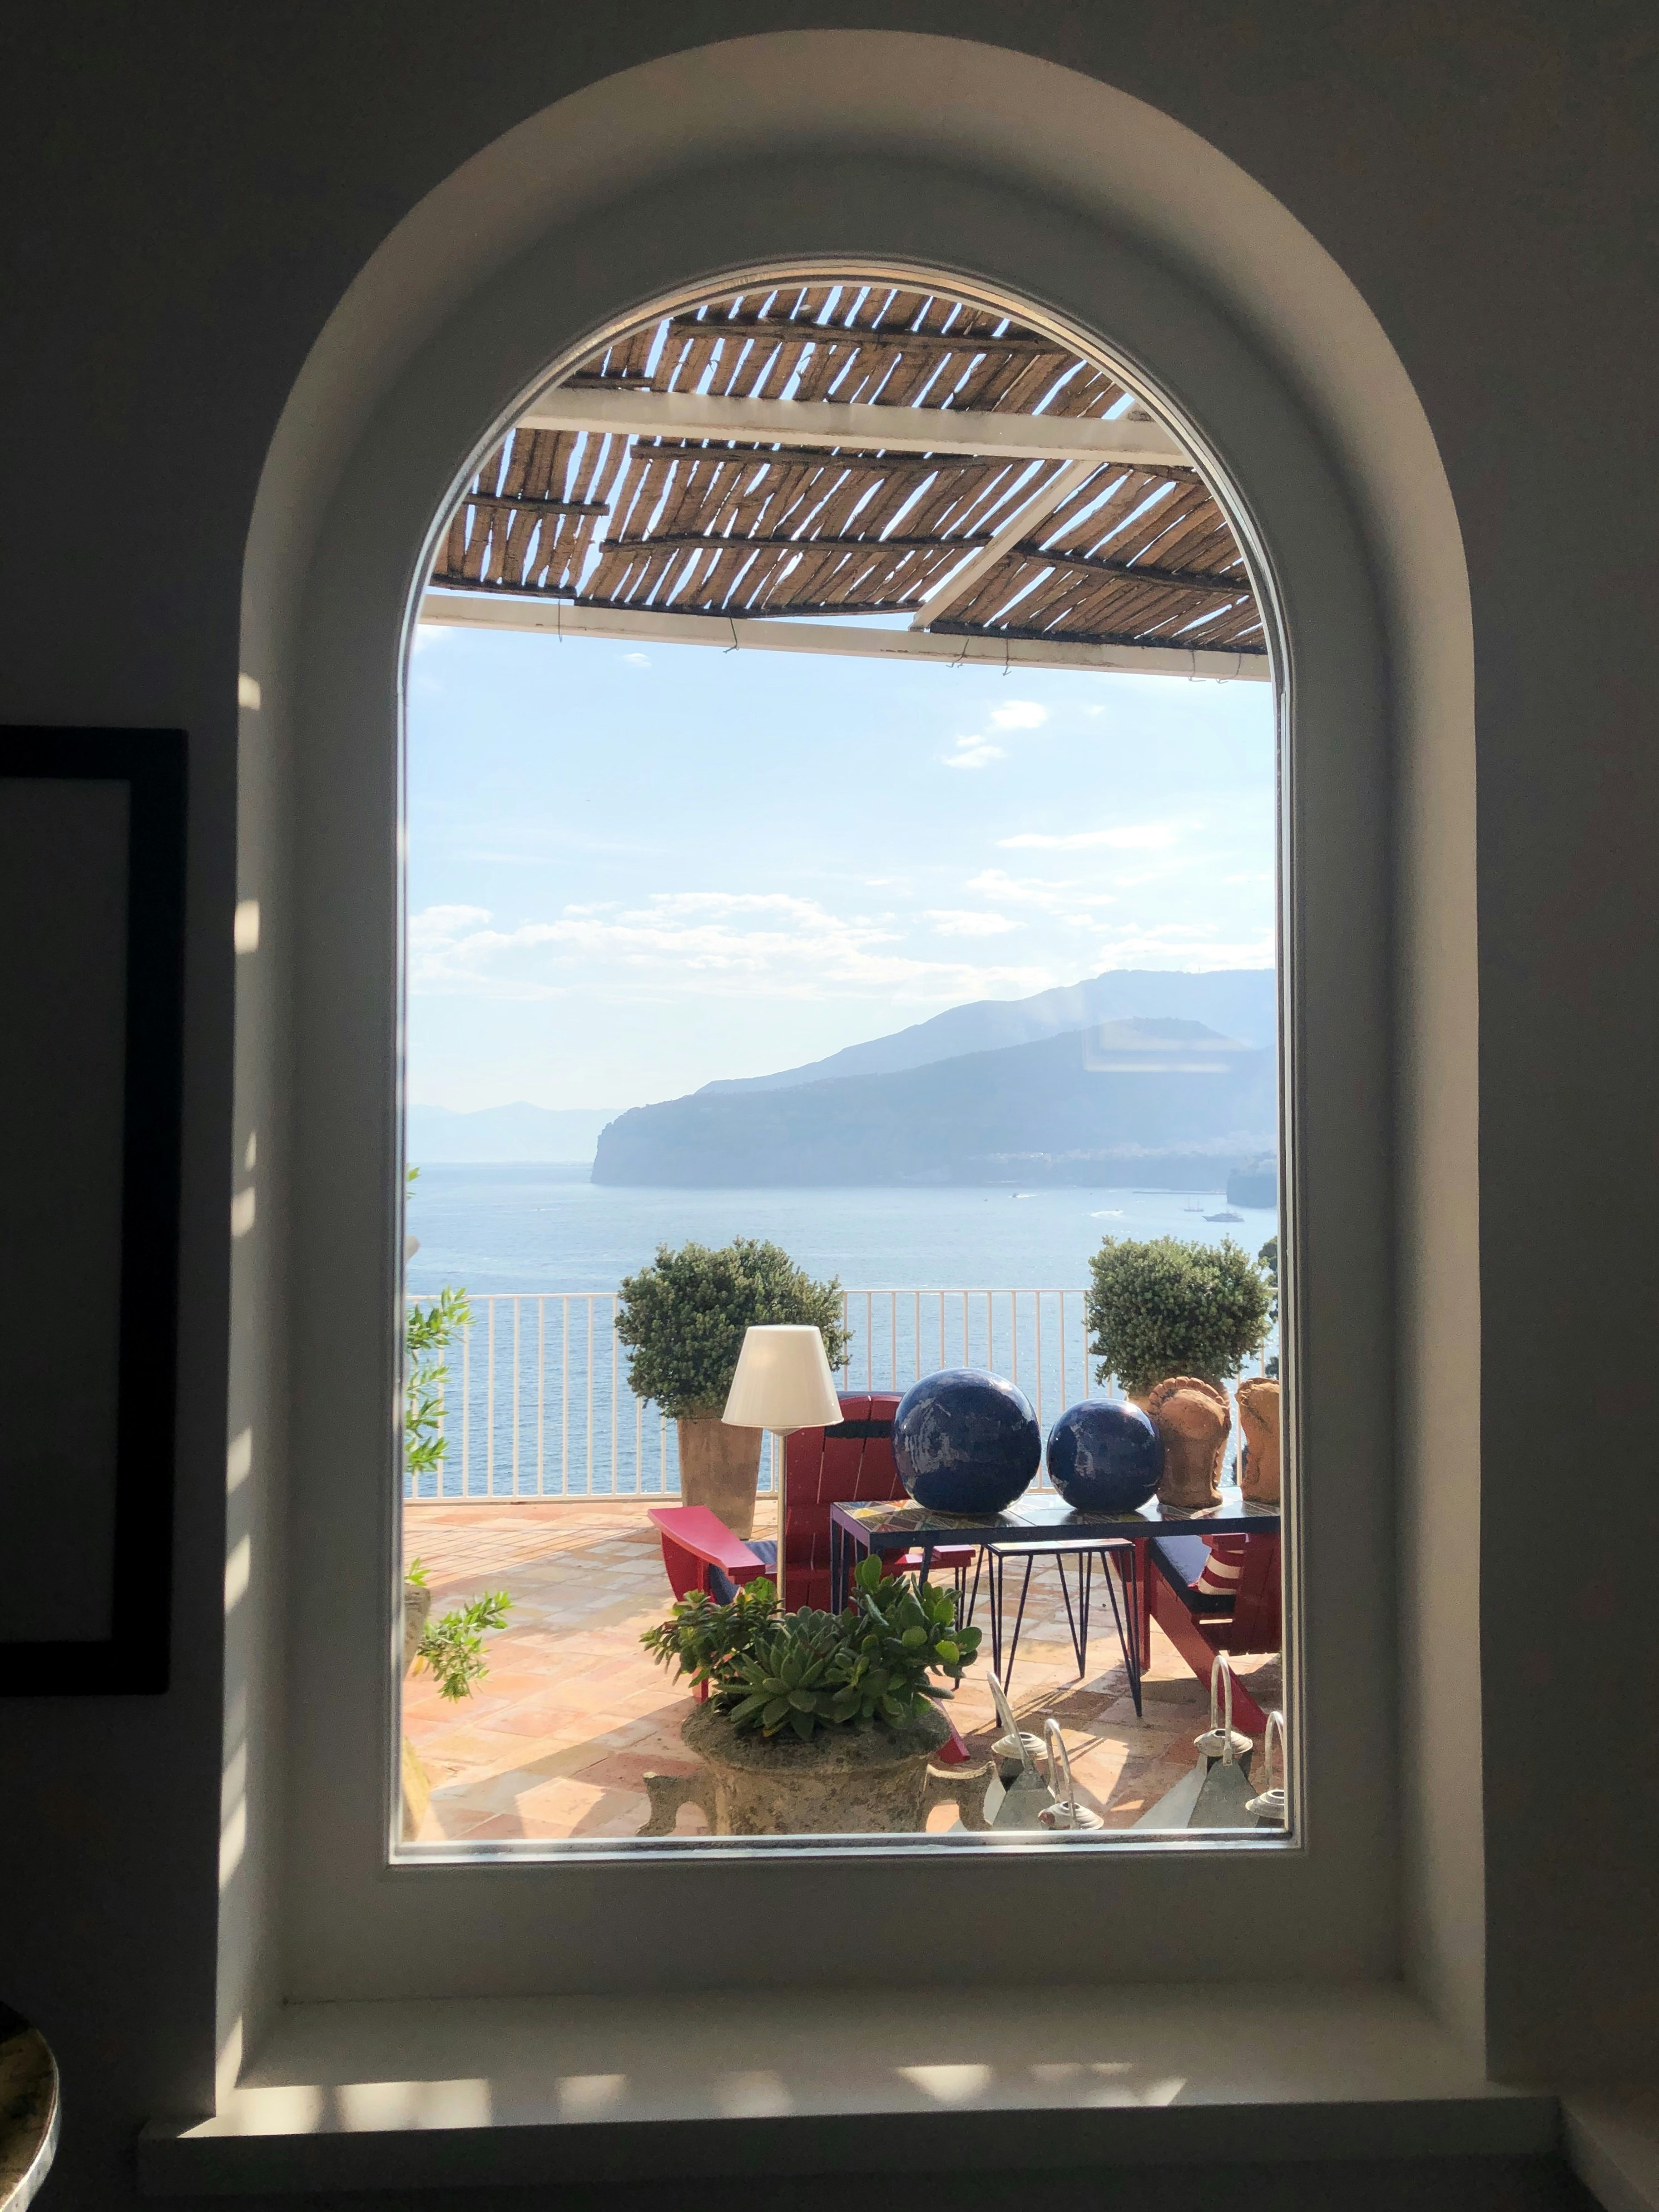 great photo recipe,how to photograph frame within a frame. the beautiful maison la minervetta sorrento italy.  ; 2 person sitting on chair near window during daytime